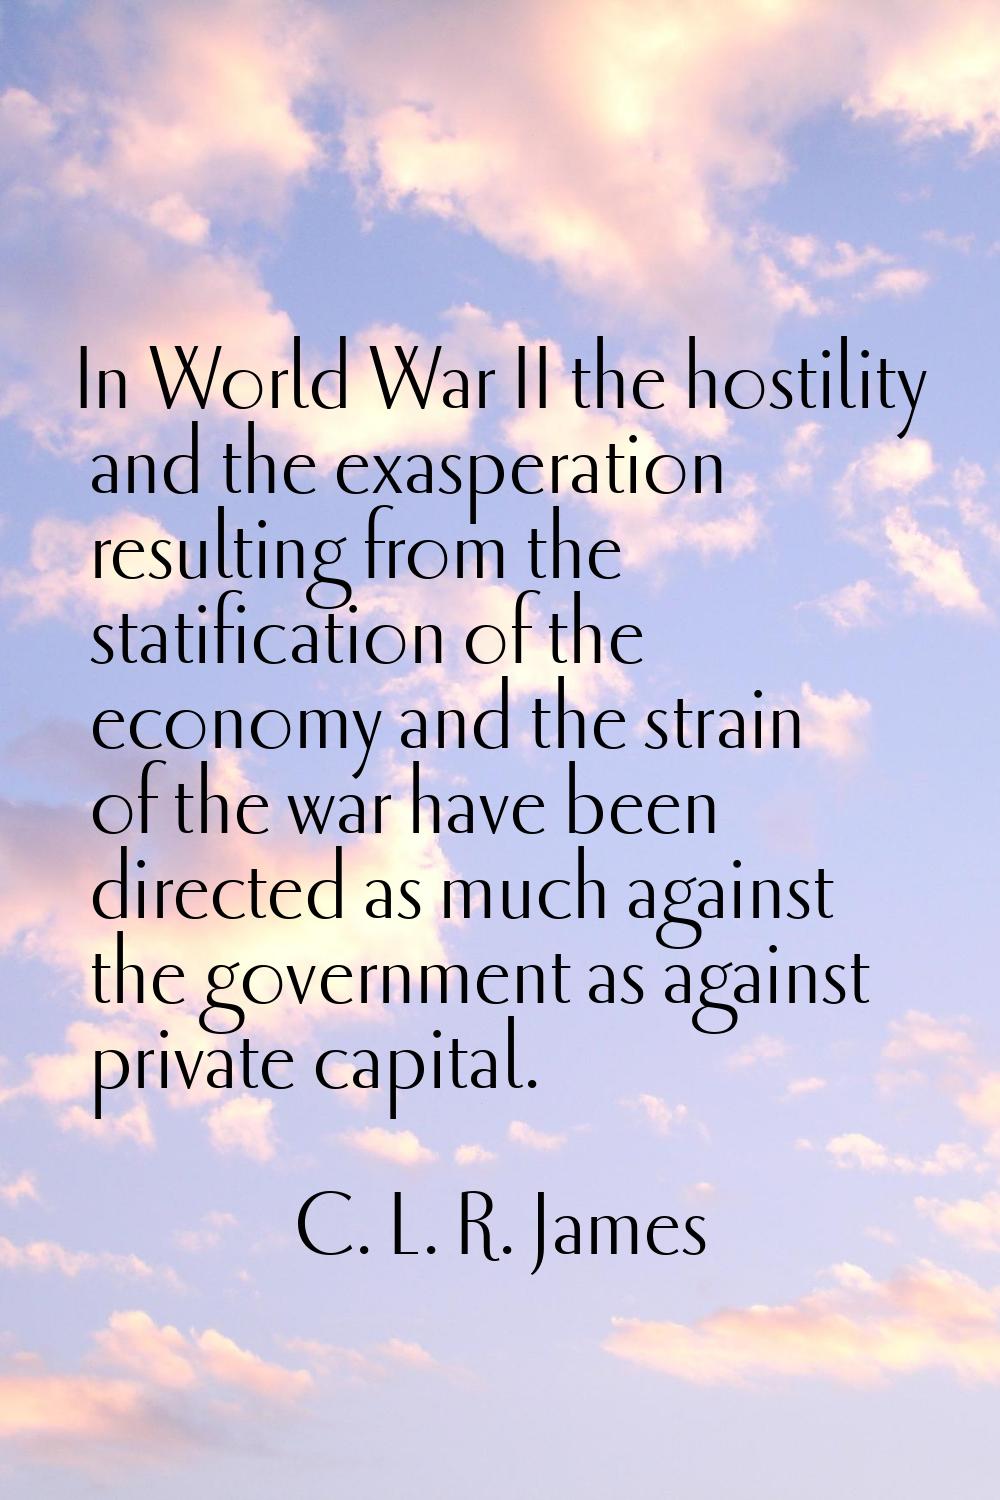 In World War II the hostility and the exasperation resulting from the statification of the economy 